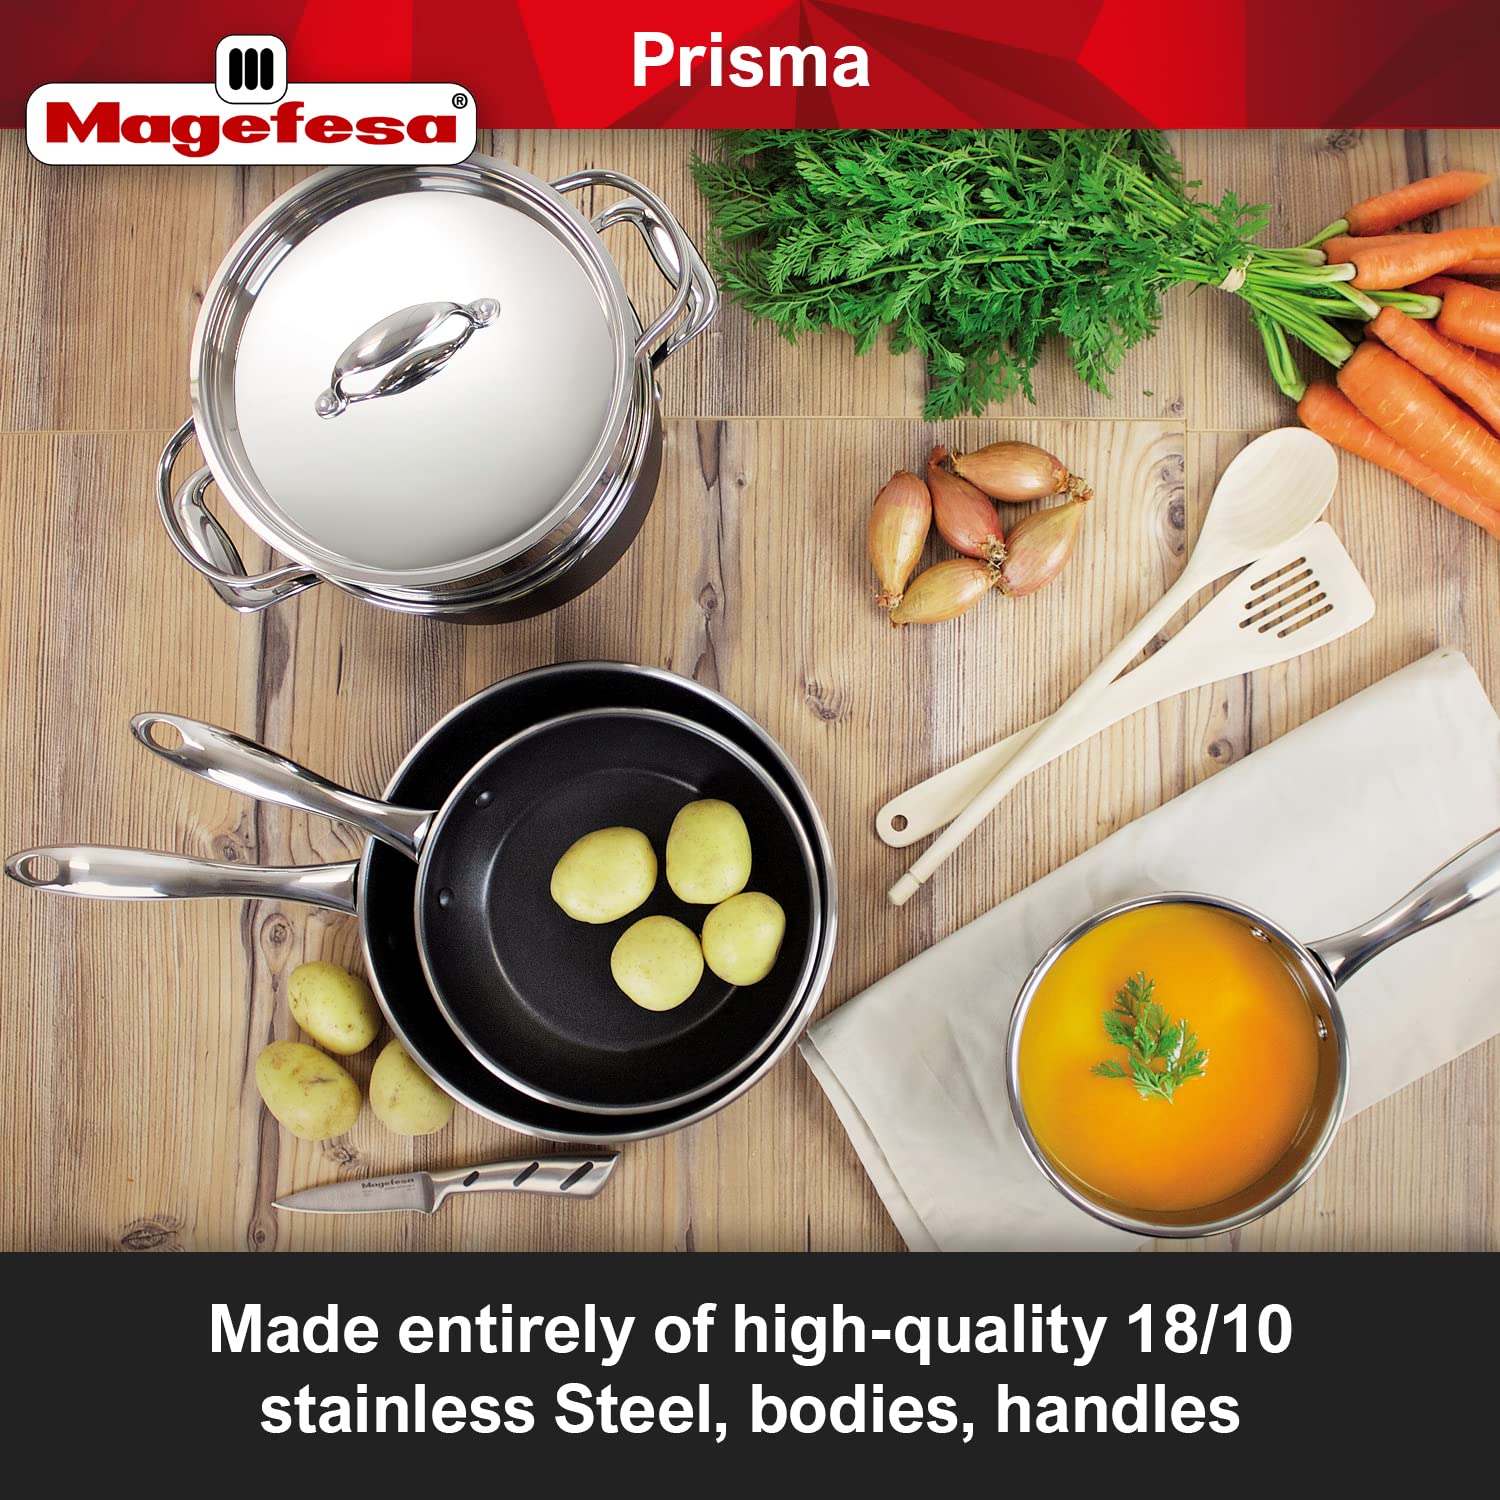 Magefesa® Prisma 13 piece cookware set, pans and pots, nonstick, made in durable & resistant stainless steel, Oven Safe up to 392°F, high-temperatura exterior coating in matte black